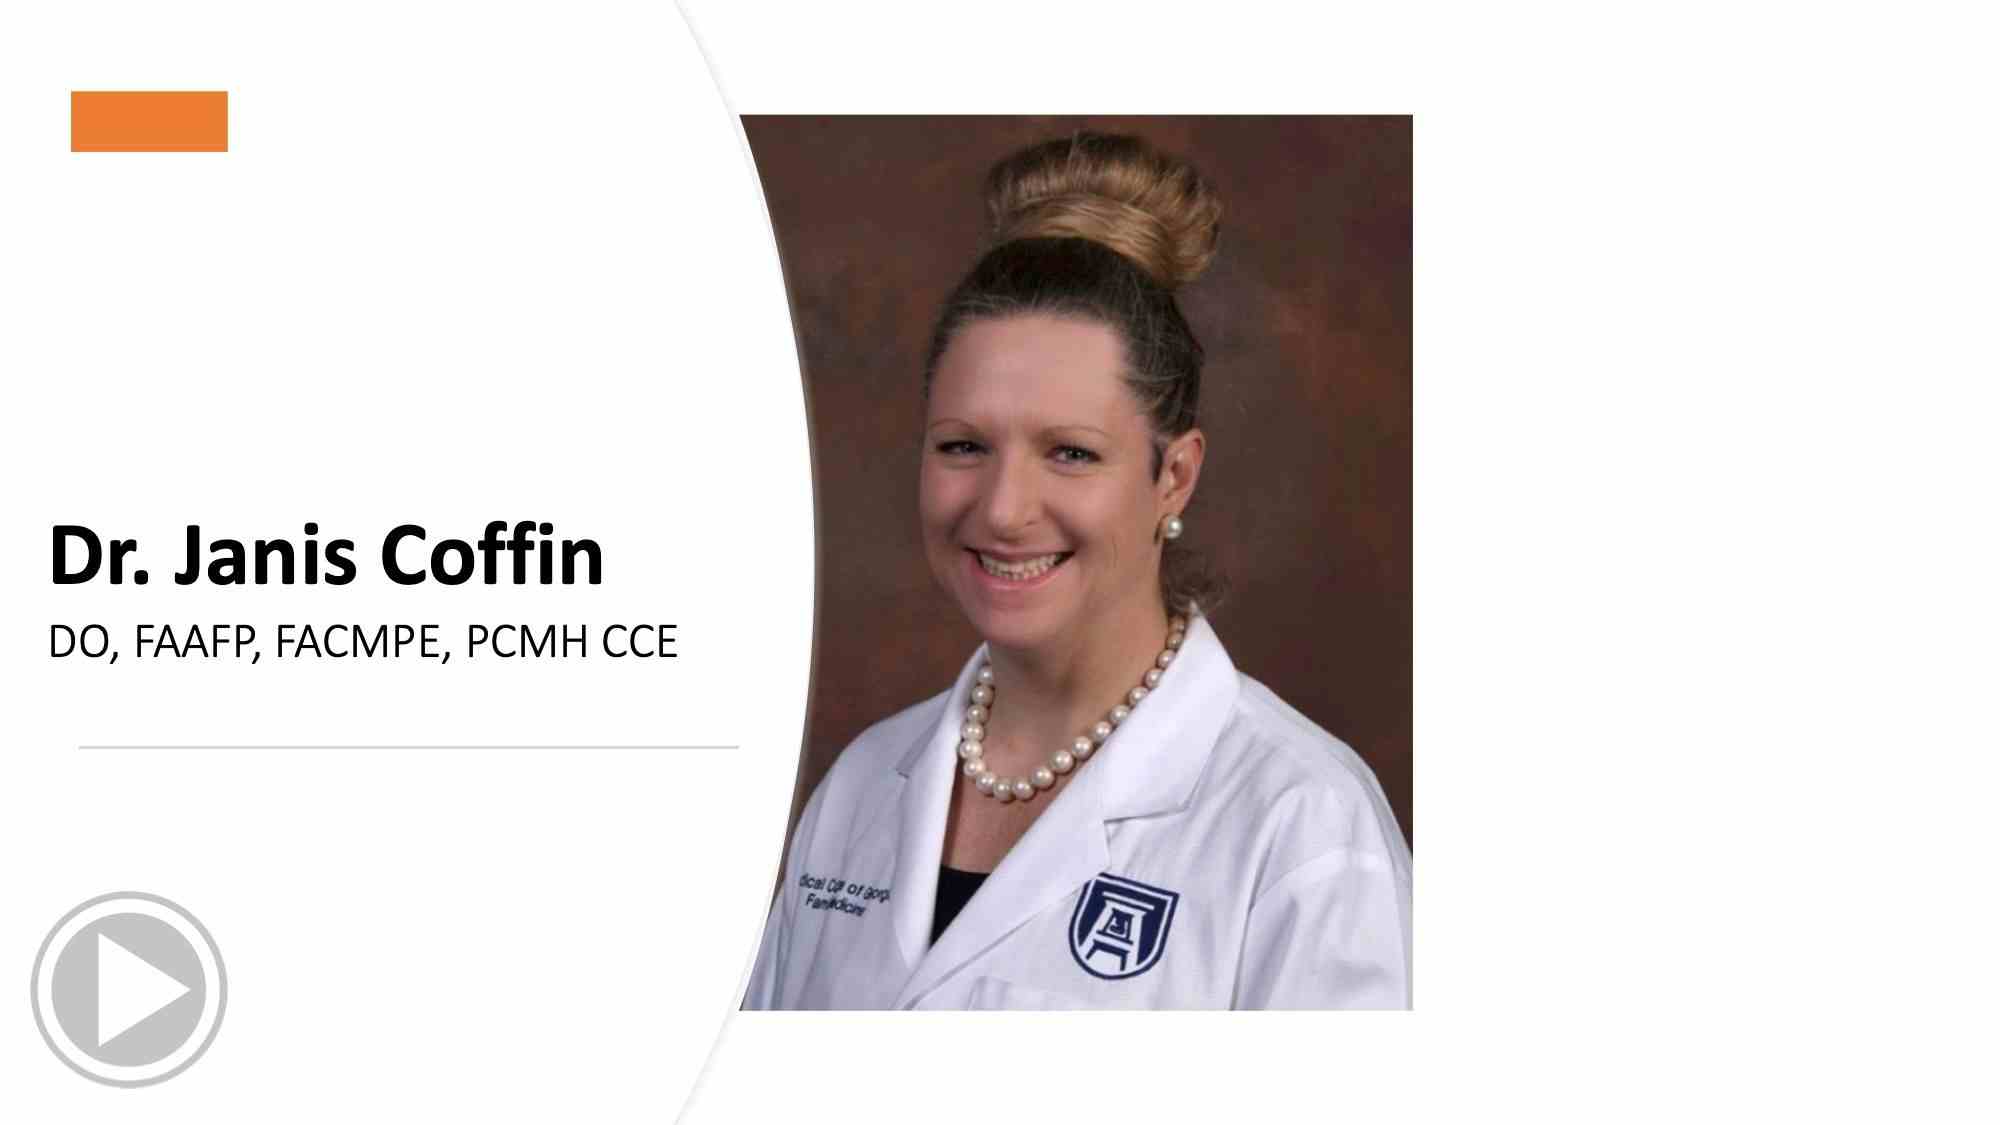 Dr. Janis Coffin, DO